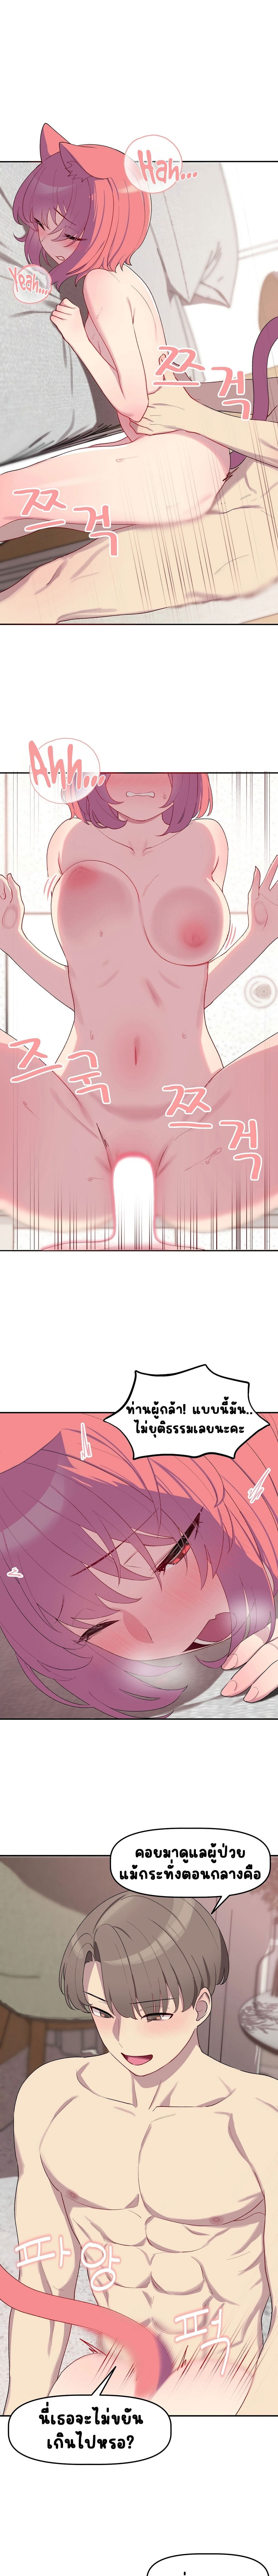 Hospitalized Life in Another World ตอนที่ 4 ภาพ 1